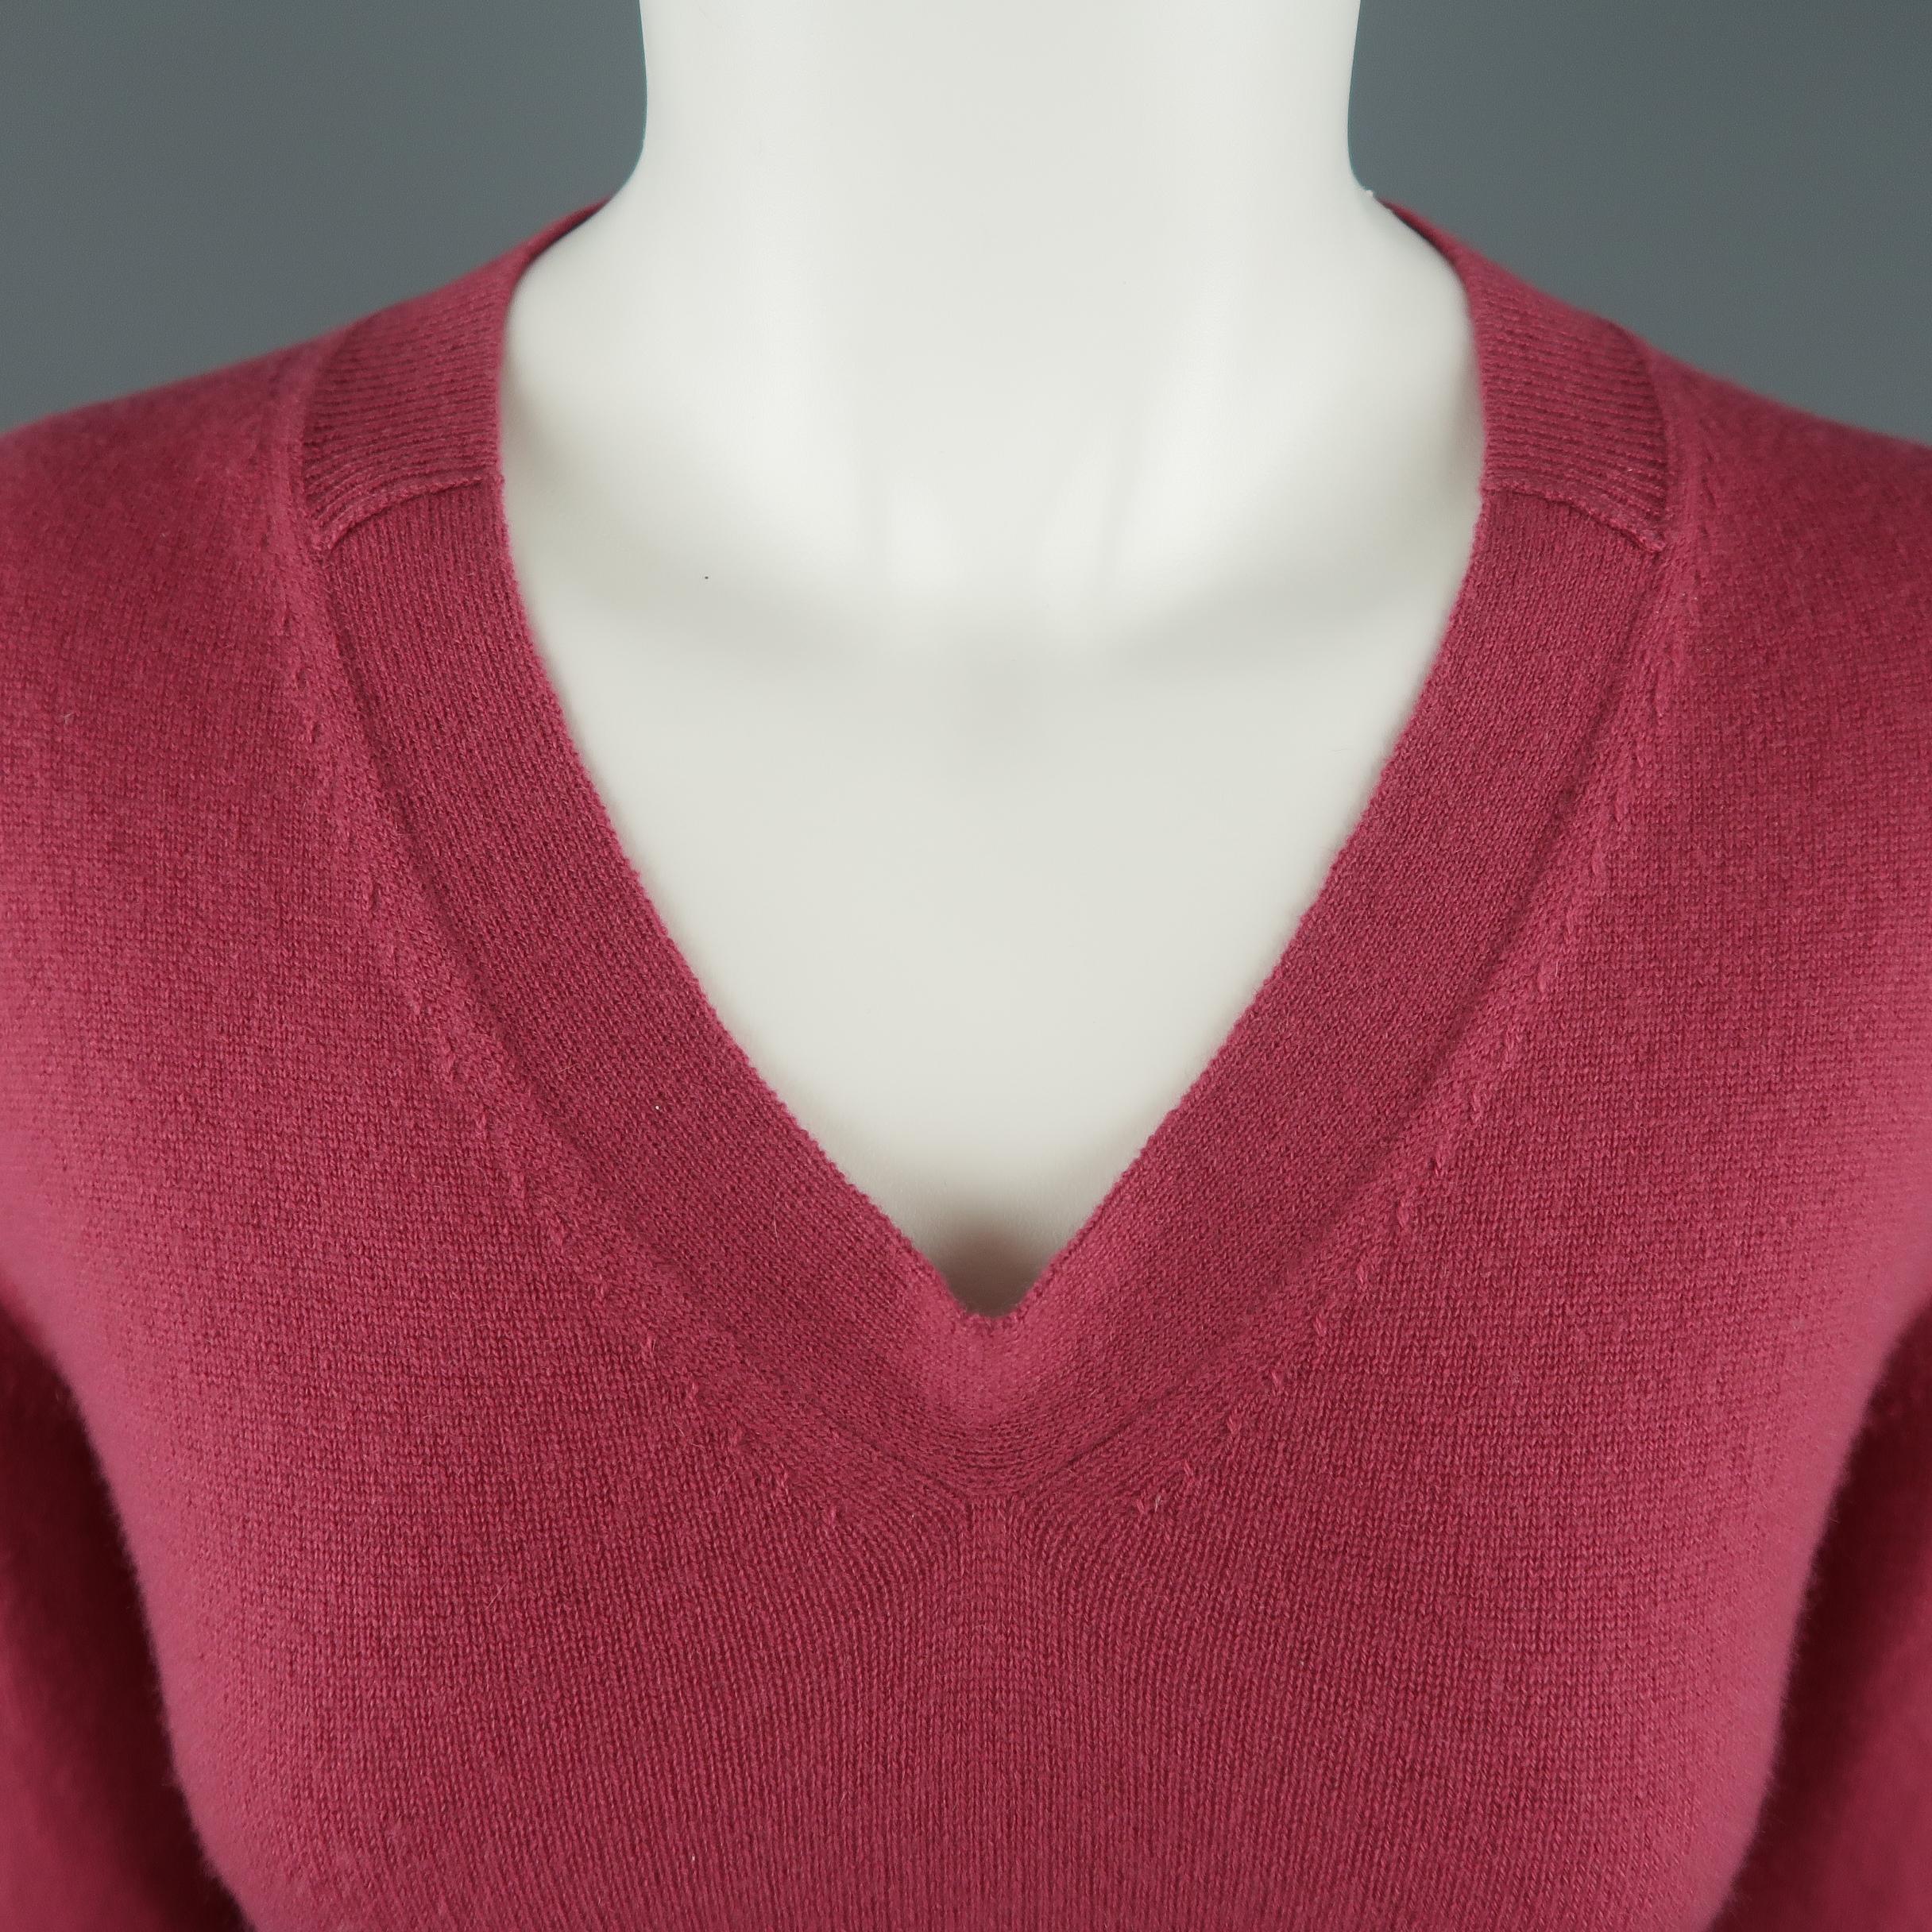 JIL SANDER pullover sweater comes in a light weight muted raspberry pink tone cashmere knit with a V neck and thick ribbed waistband. Made in Italy. Retail price $860,00
 
Good Pre-Owned Condition.
Marked: IT 40
 
Measurements:
 
Shoulder: 17